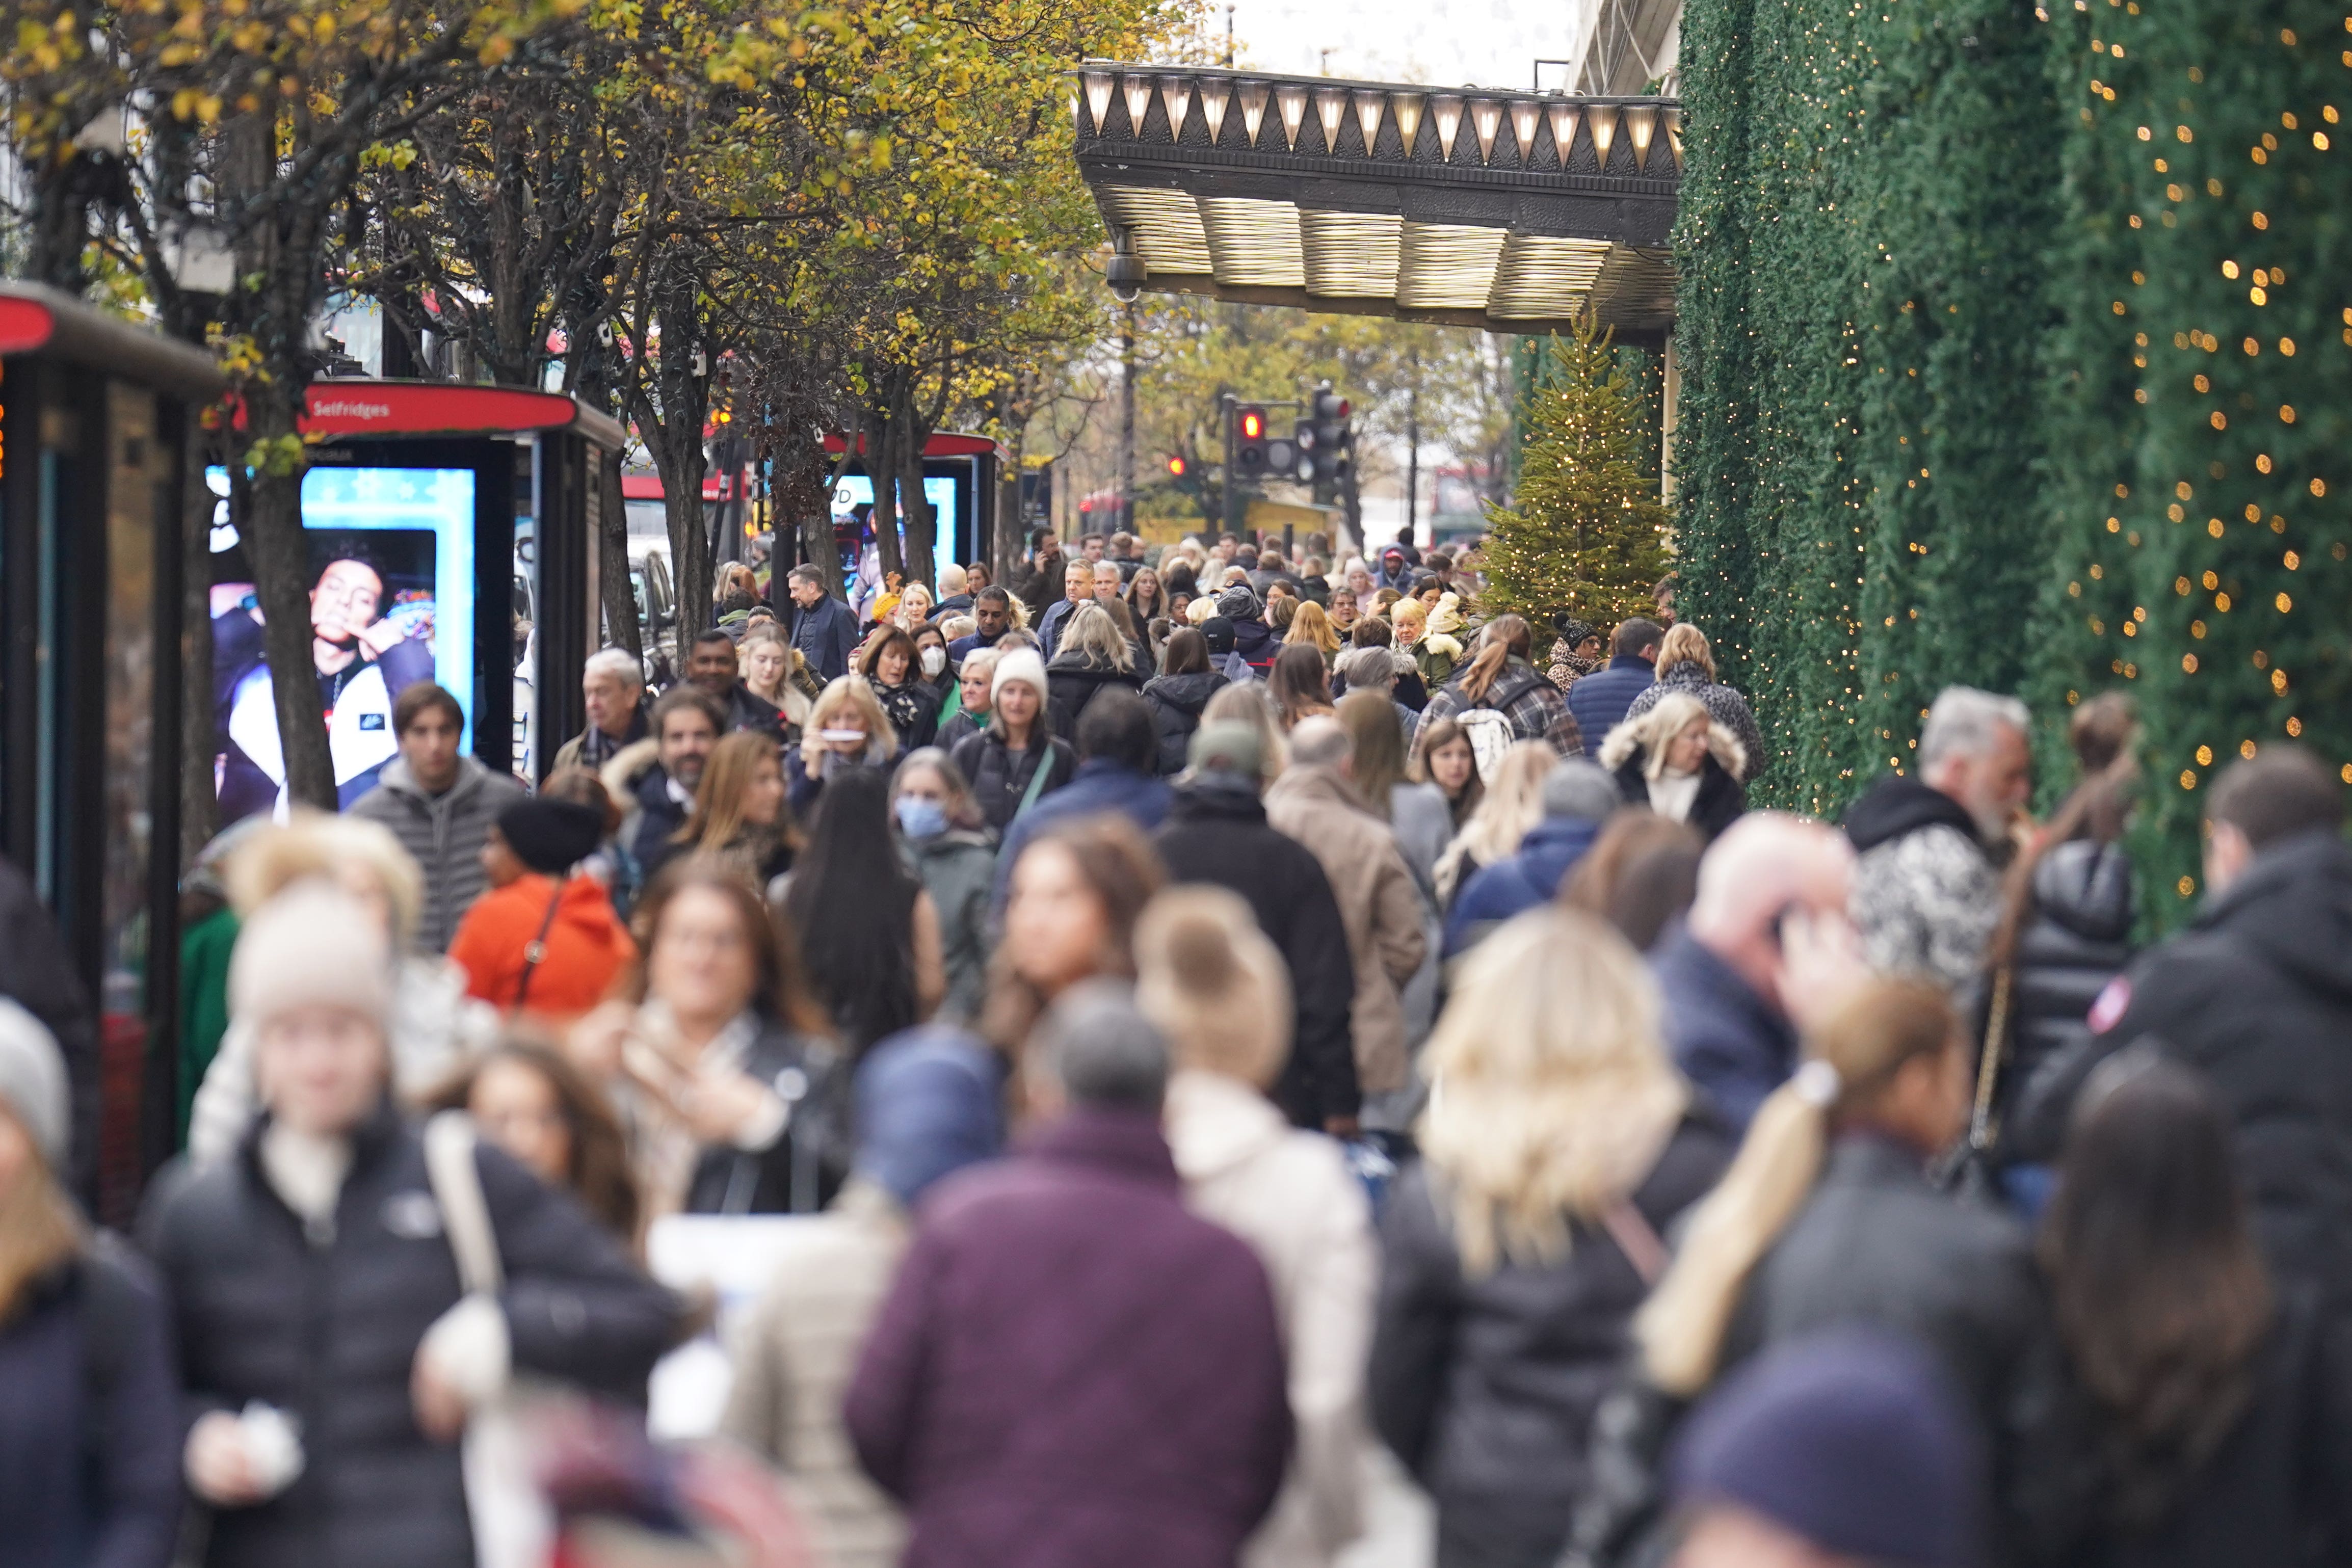 High streets across the UK saw shopper numbers slump due to rail strikes and cold winter weather